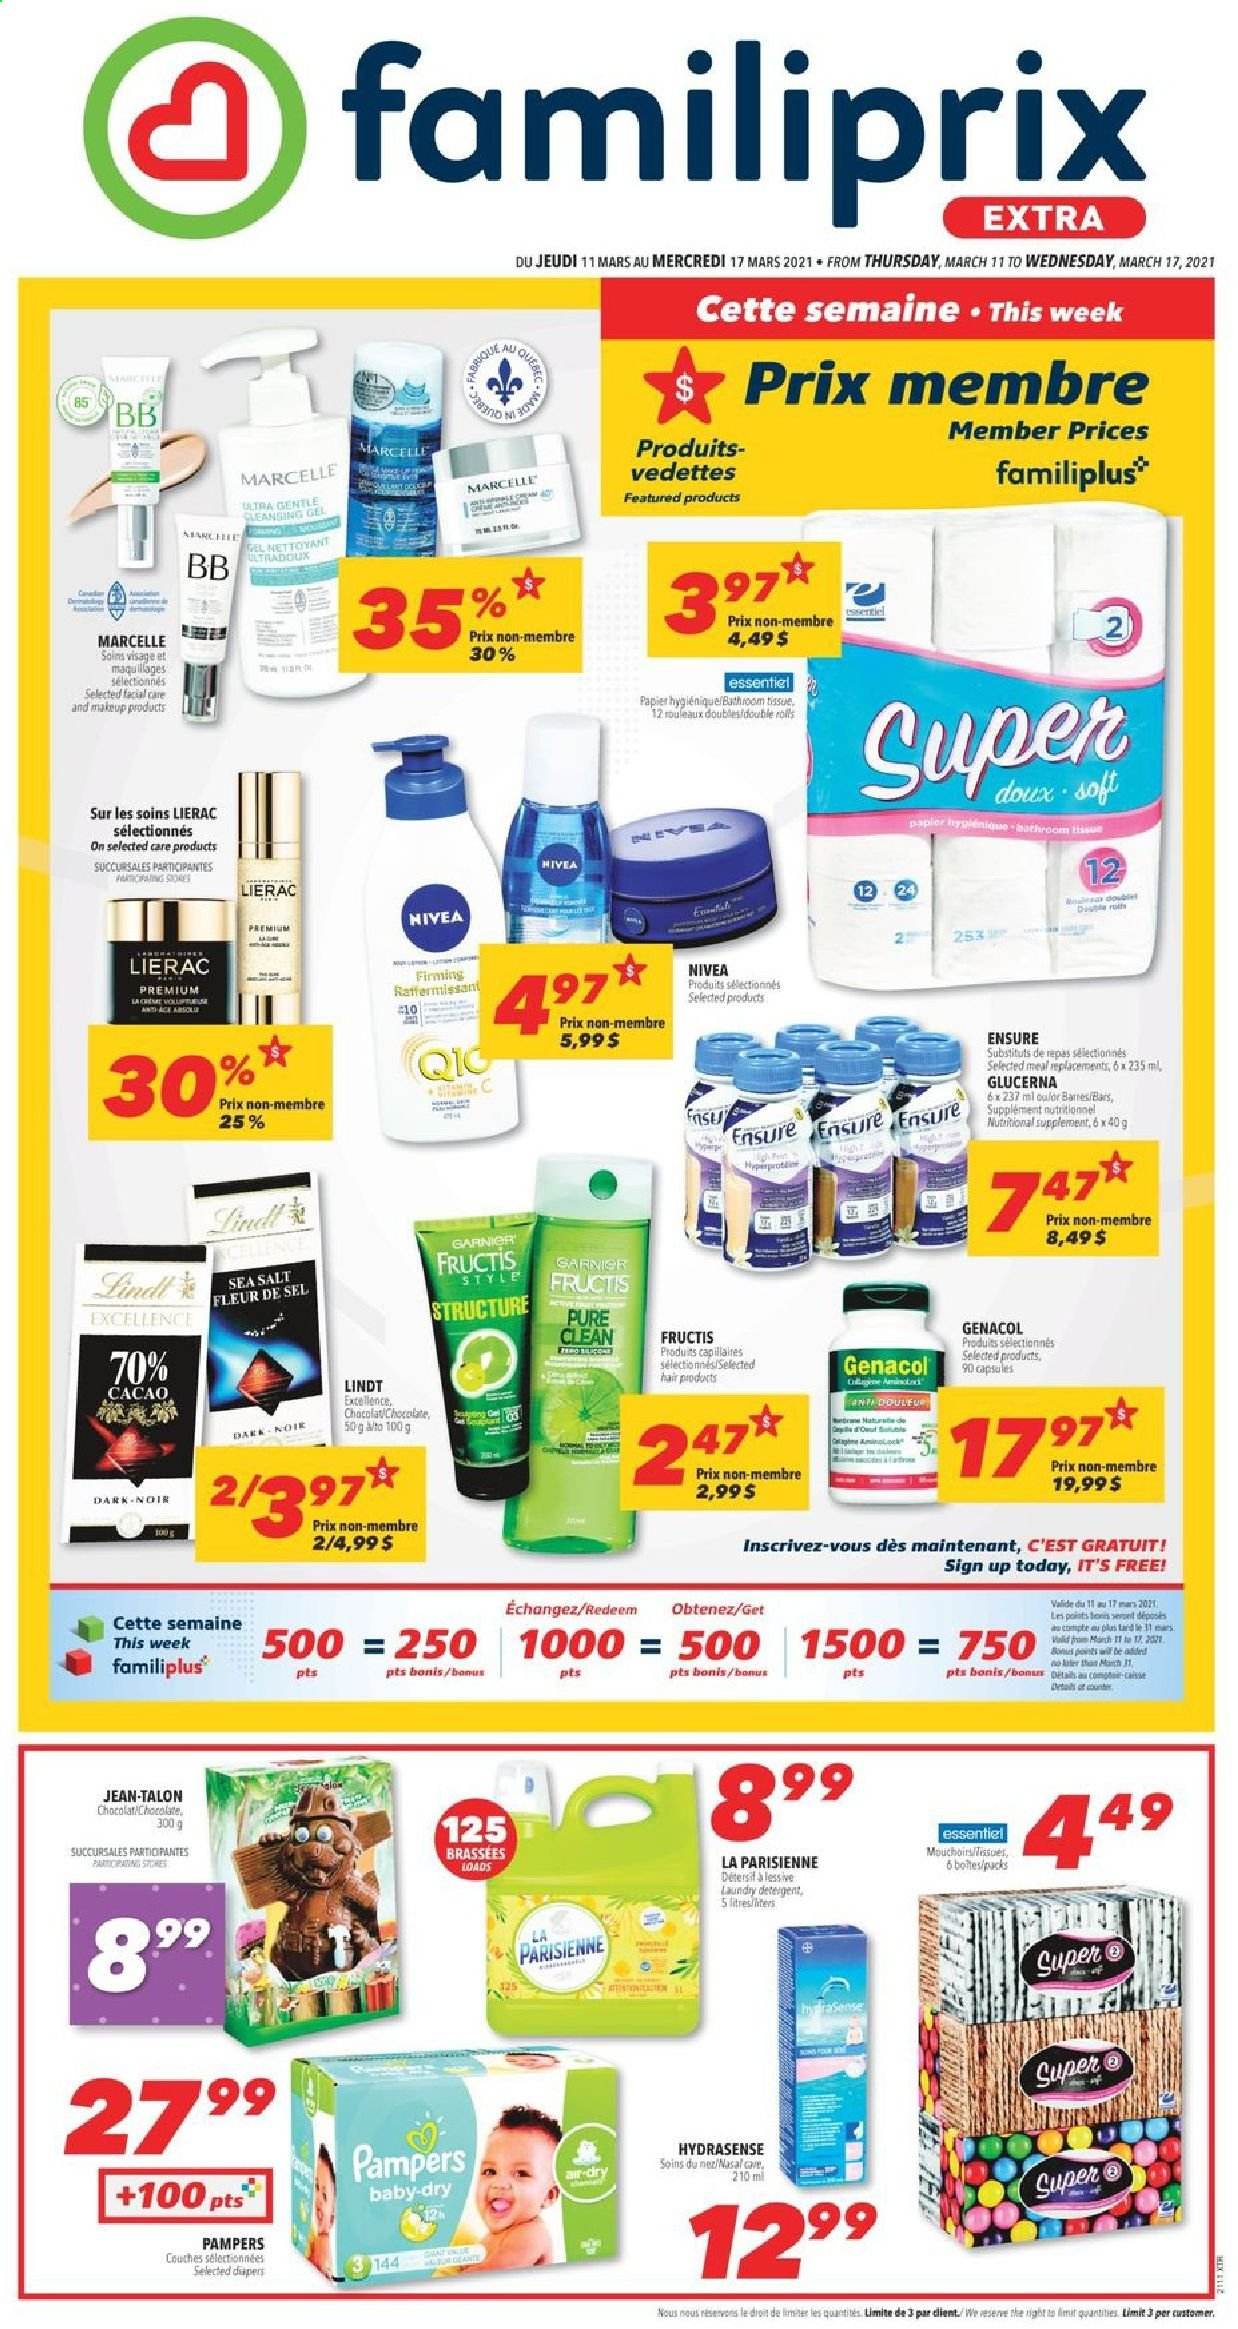 thumbnail - Familiprix Extra Flyer - March 11, 2021 - March 17, 2021 - Sales products - chocolate, Mars, sea salt, Ace, nappies, tissues, Fructis, makeup, Glucerna, Garnier, Pampers, Nivea. Page 1.